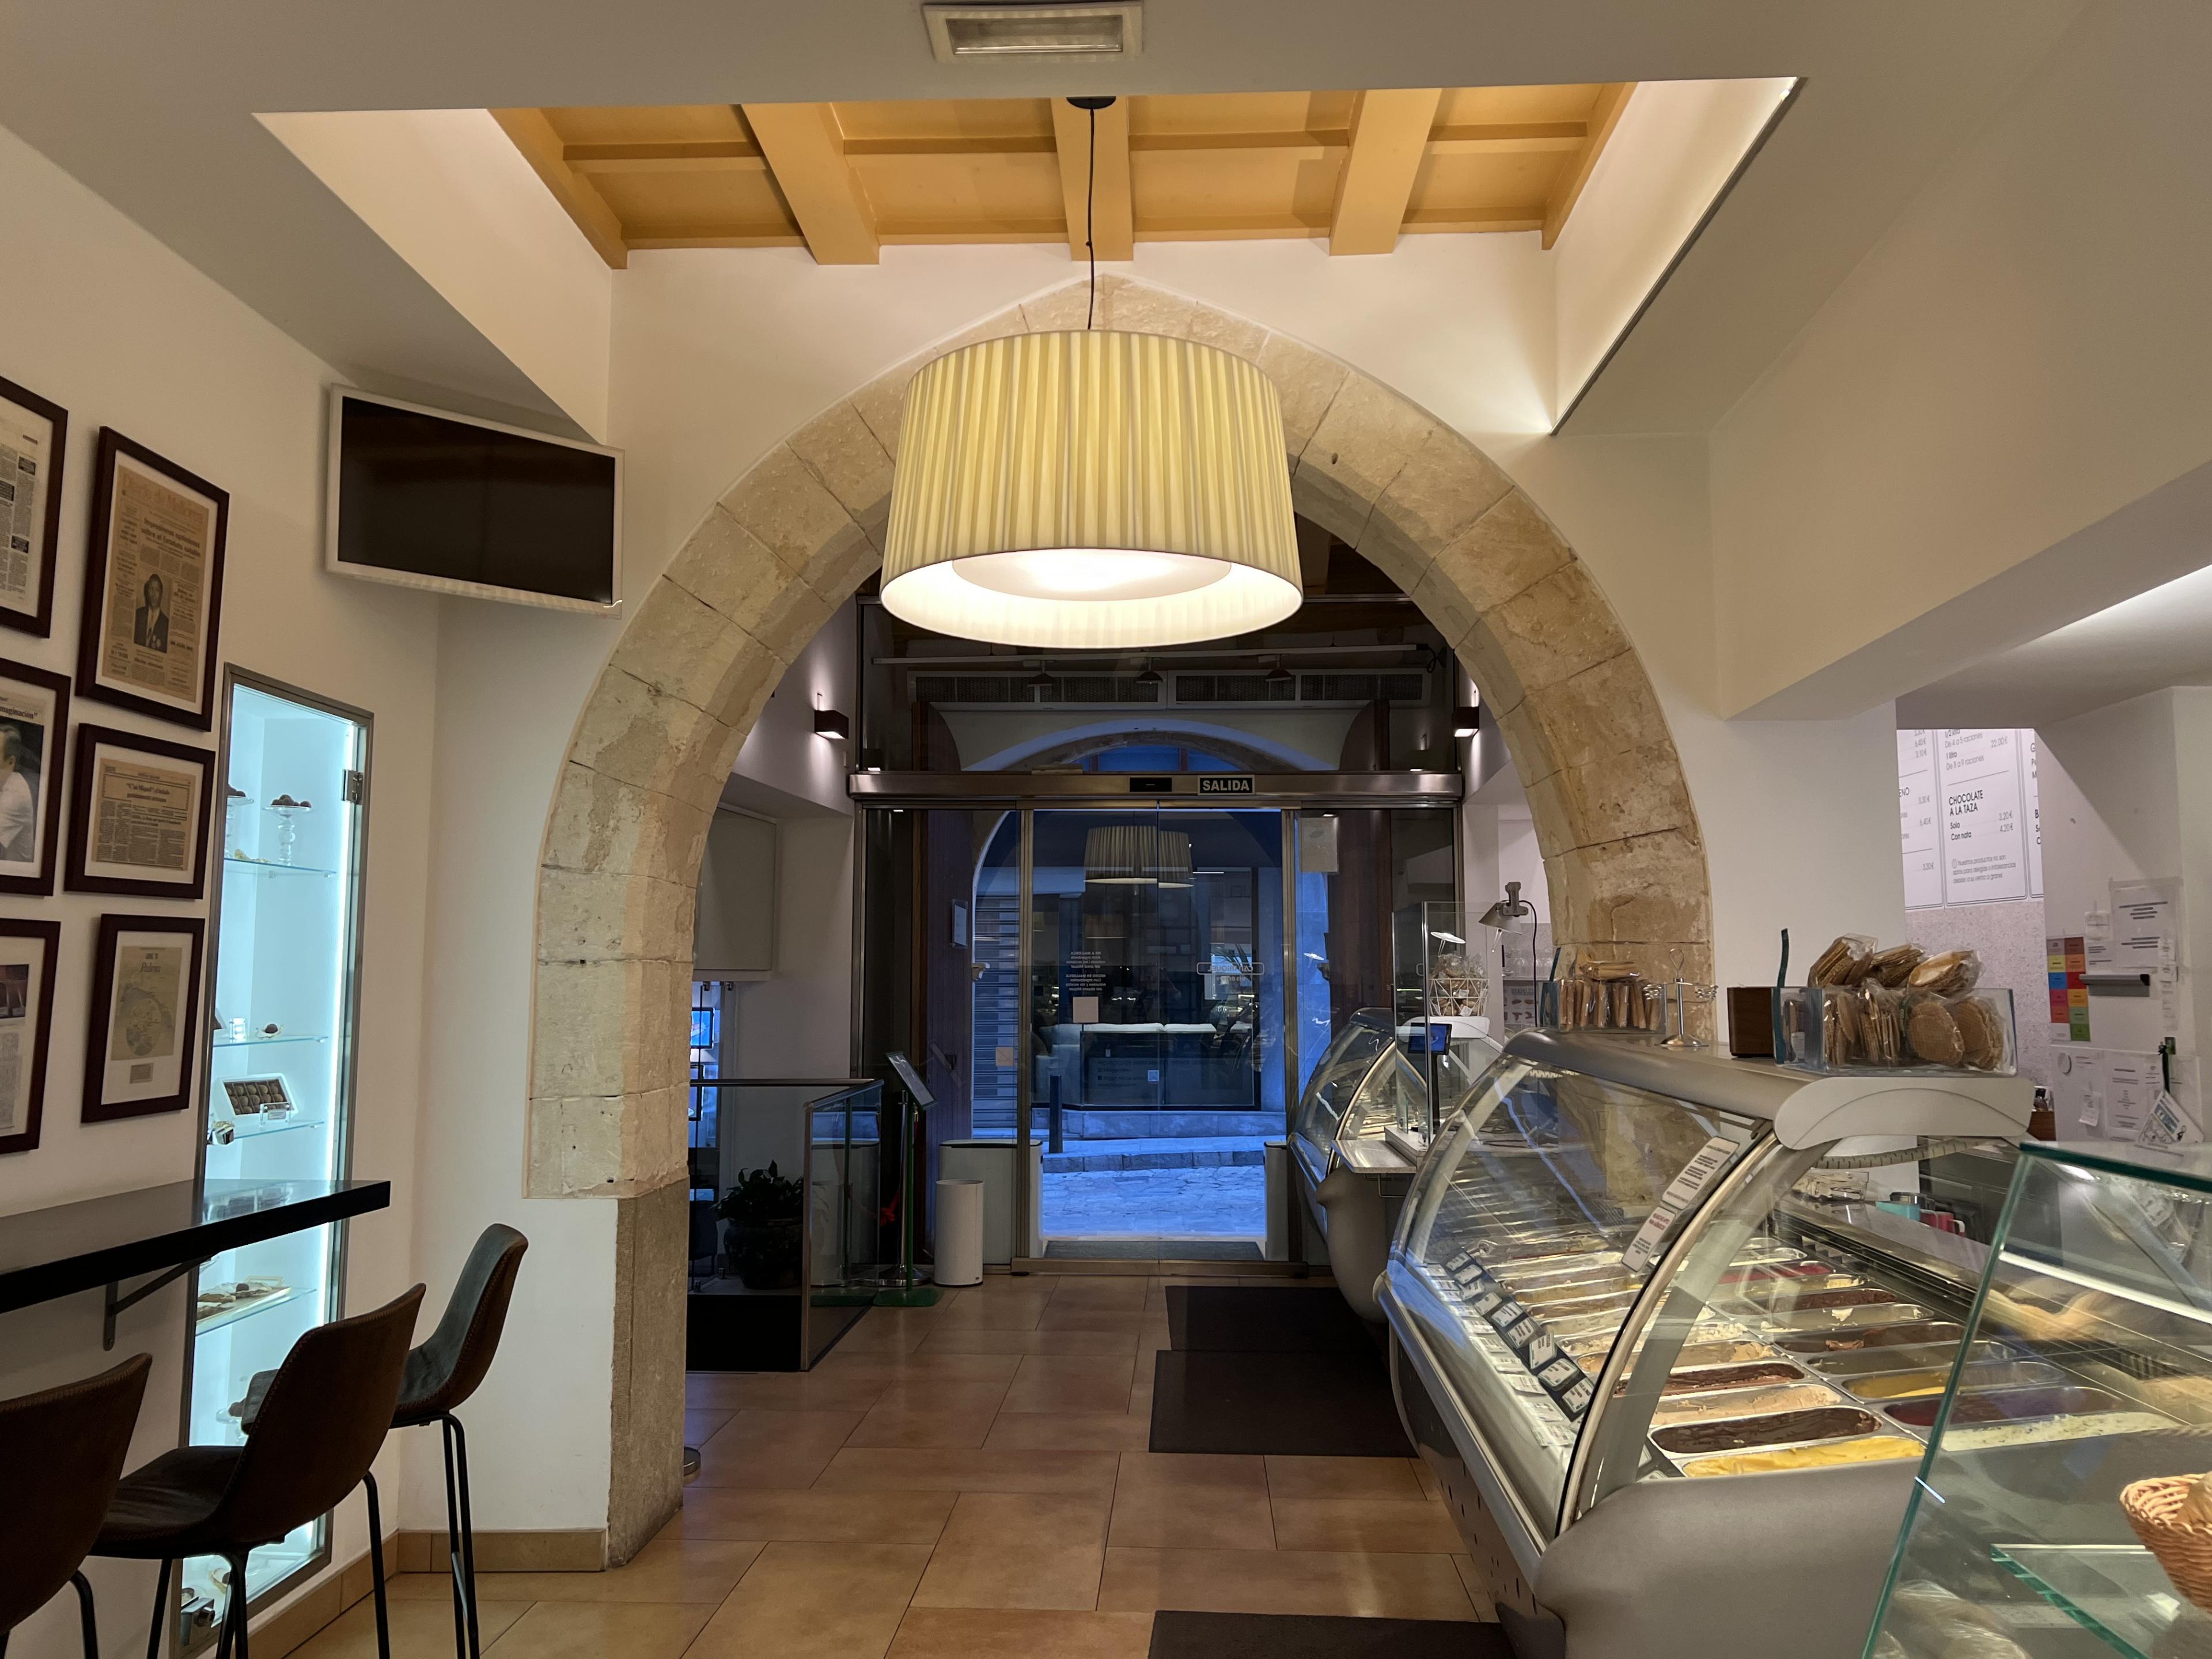 Ice cream shop with seating against the left wall and ice cream choices along the right side 